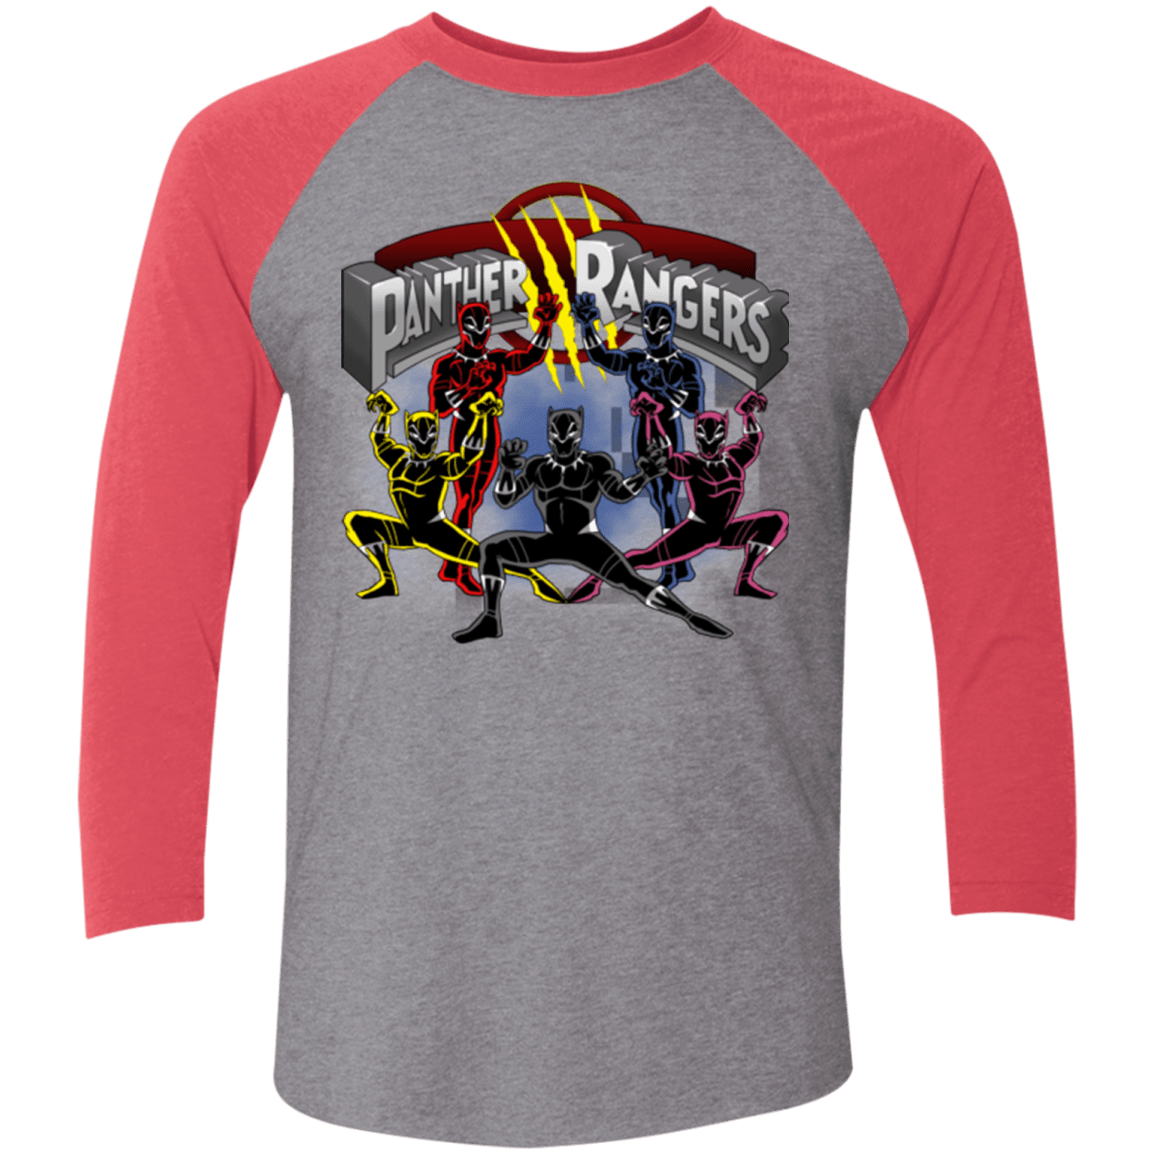 T-Shirts Premium Heather/Vintage Red / X-Small Panther Rangers Men's Triblend 3/4 Sleeve